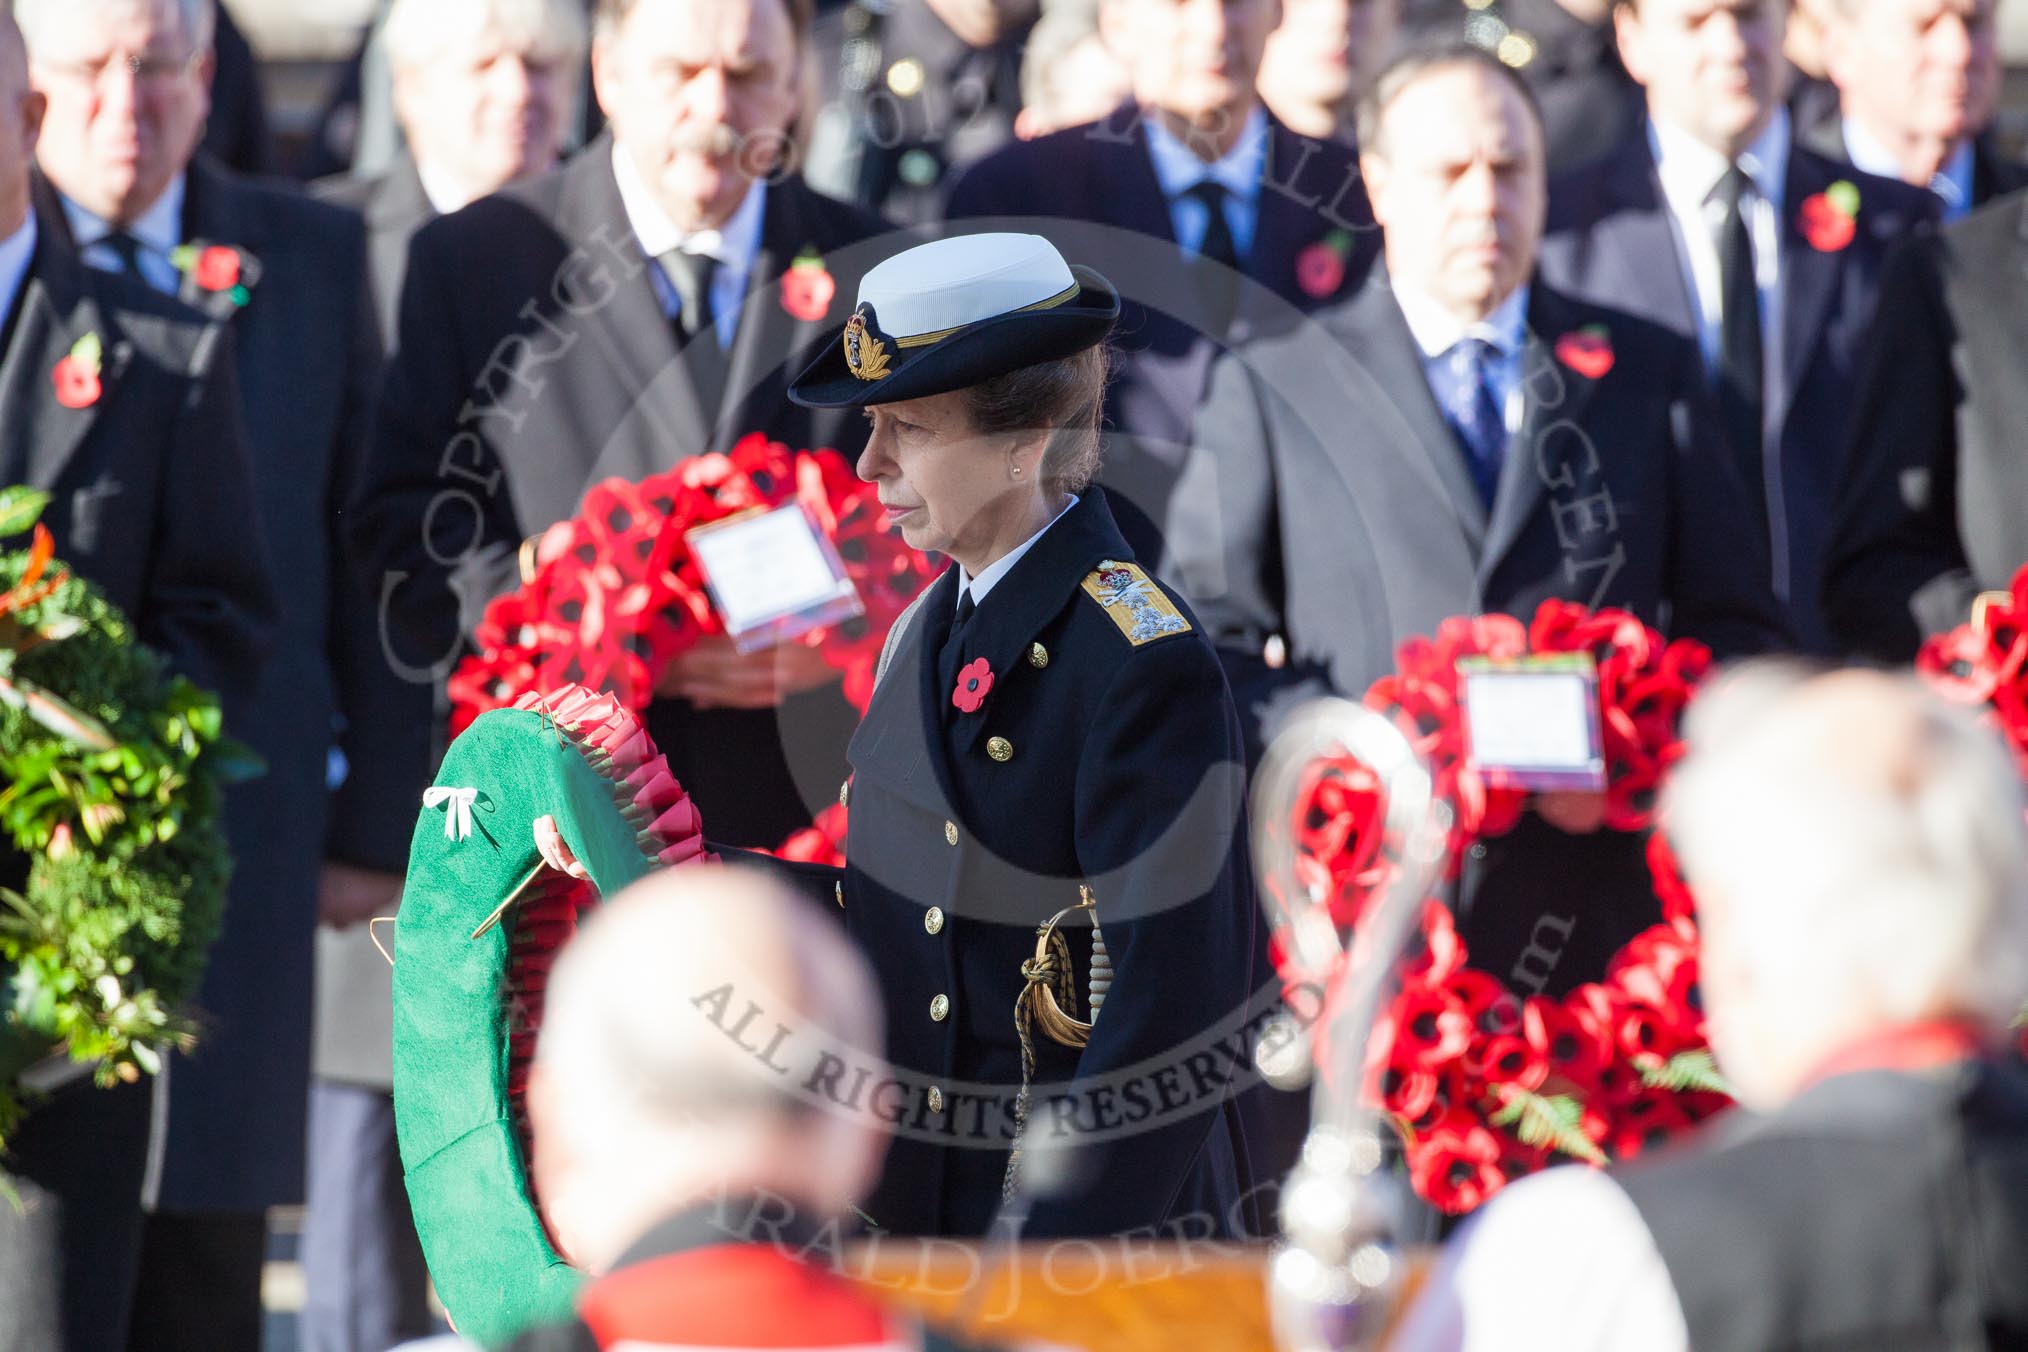 HRH The Princess Royal about to lay her wreath at the Cenotaph. In the foreground, and out of focus, the Bishop of London.